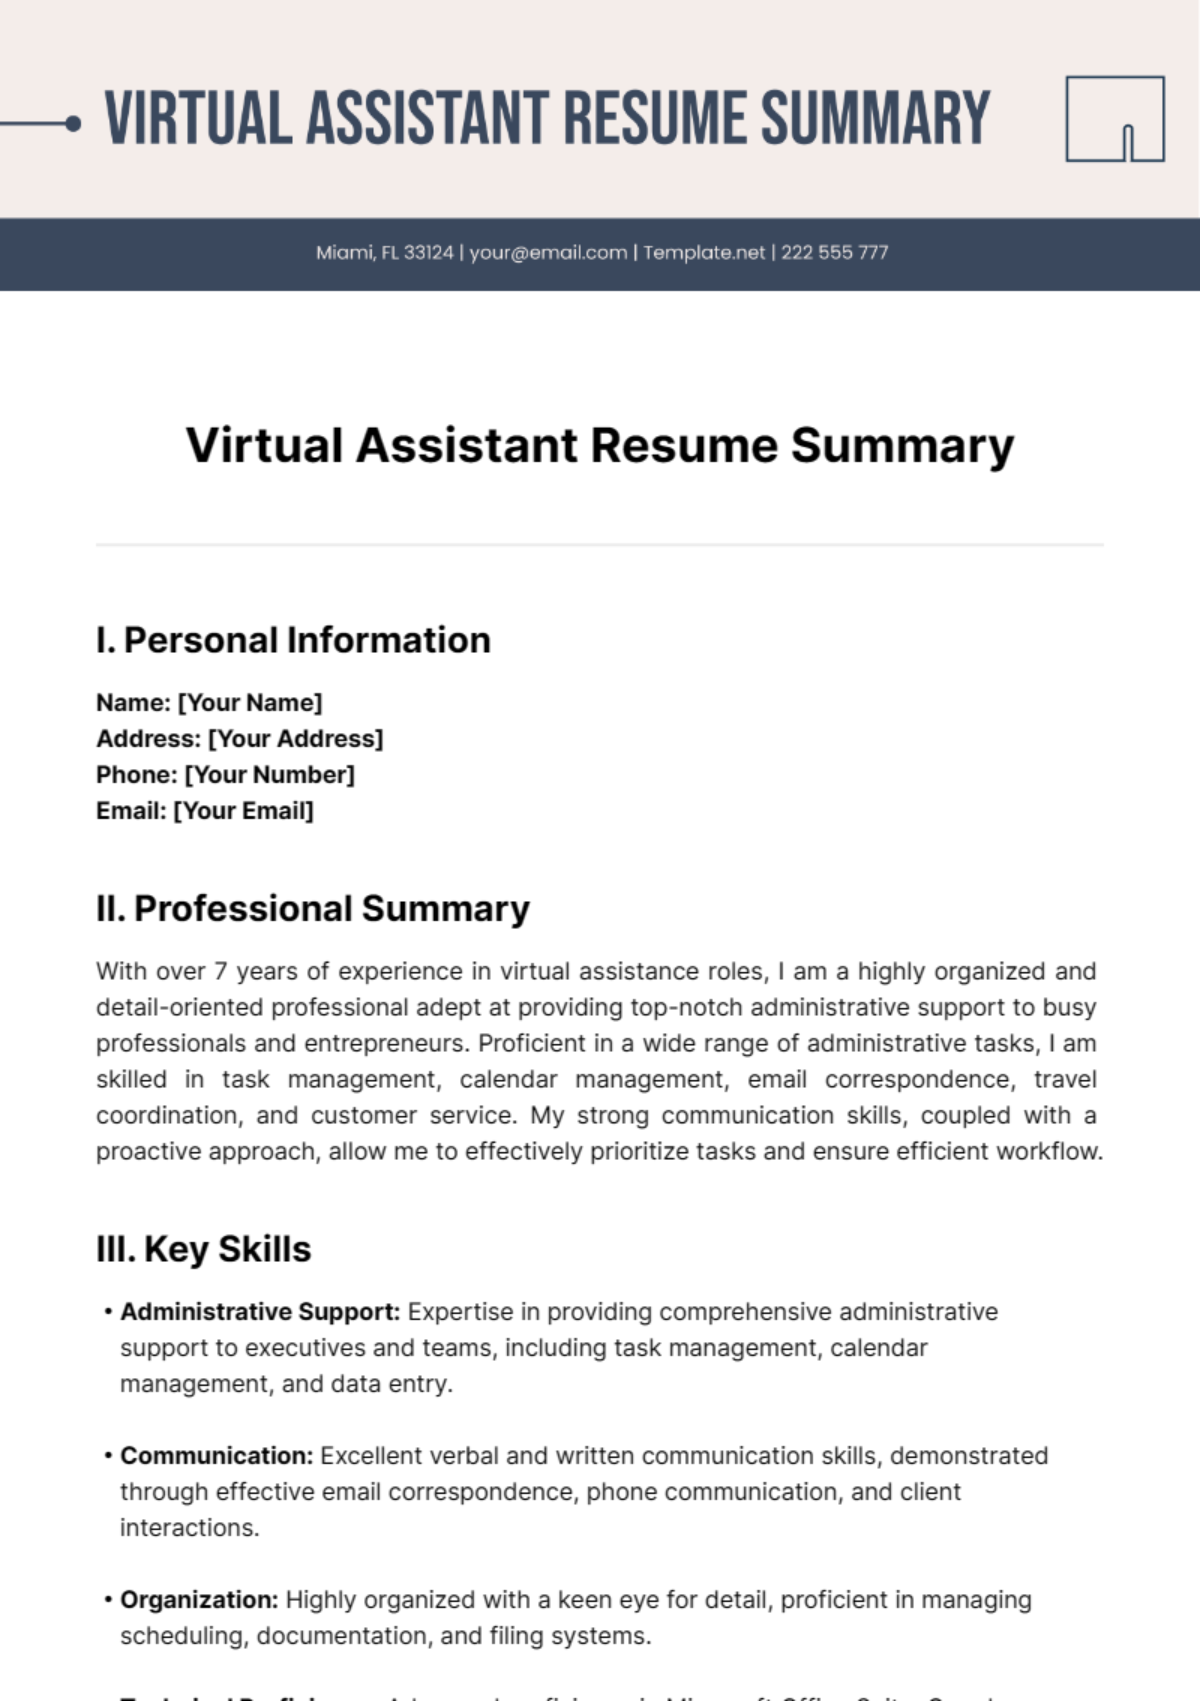 Virtual Assistant Resume Summary Template